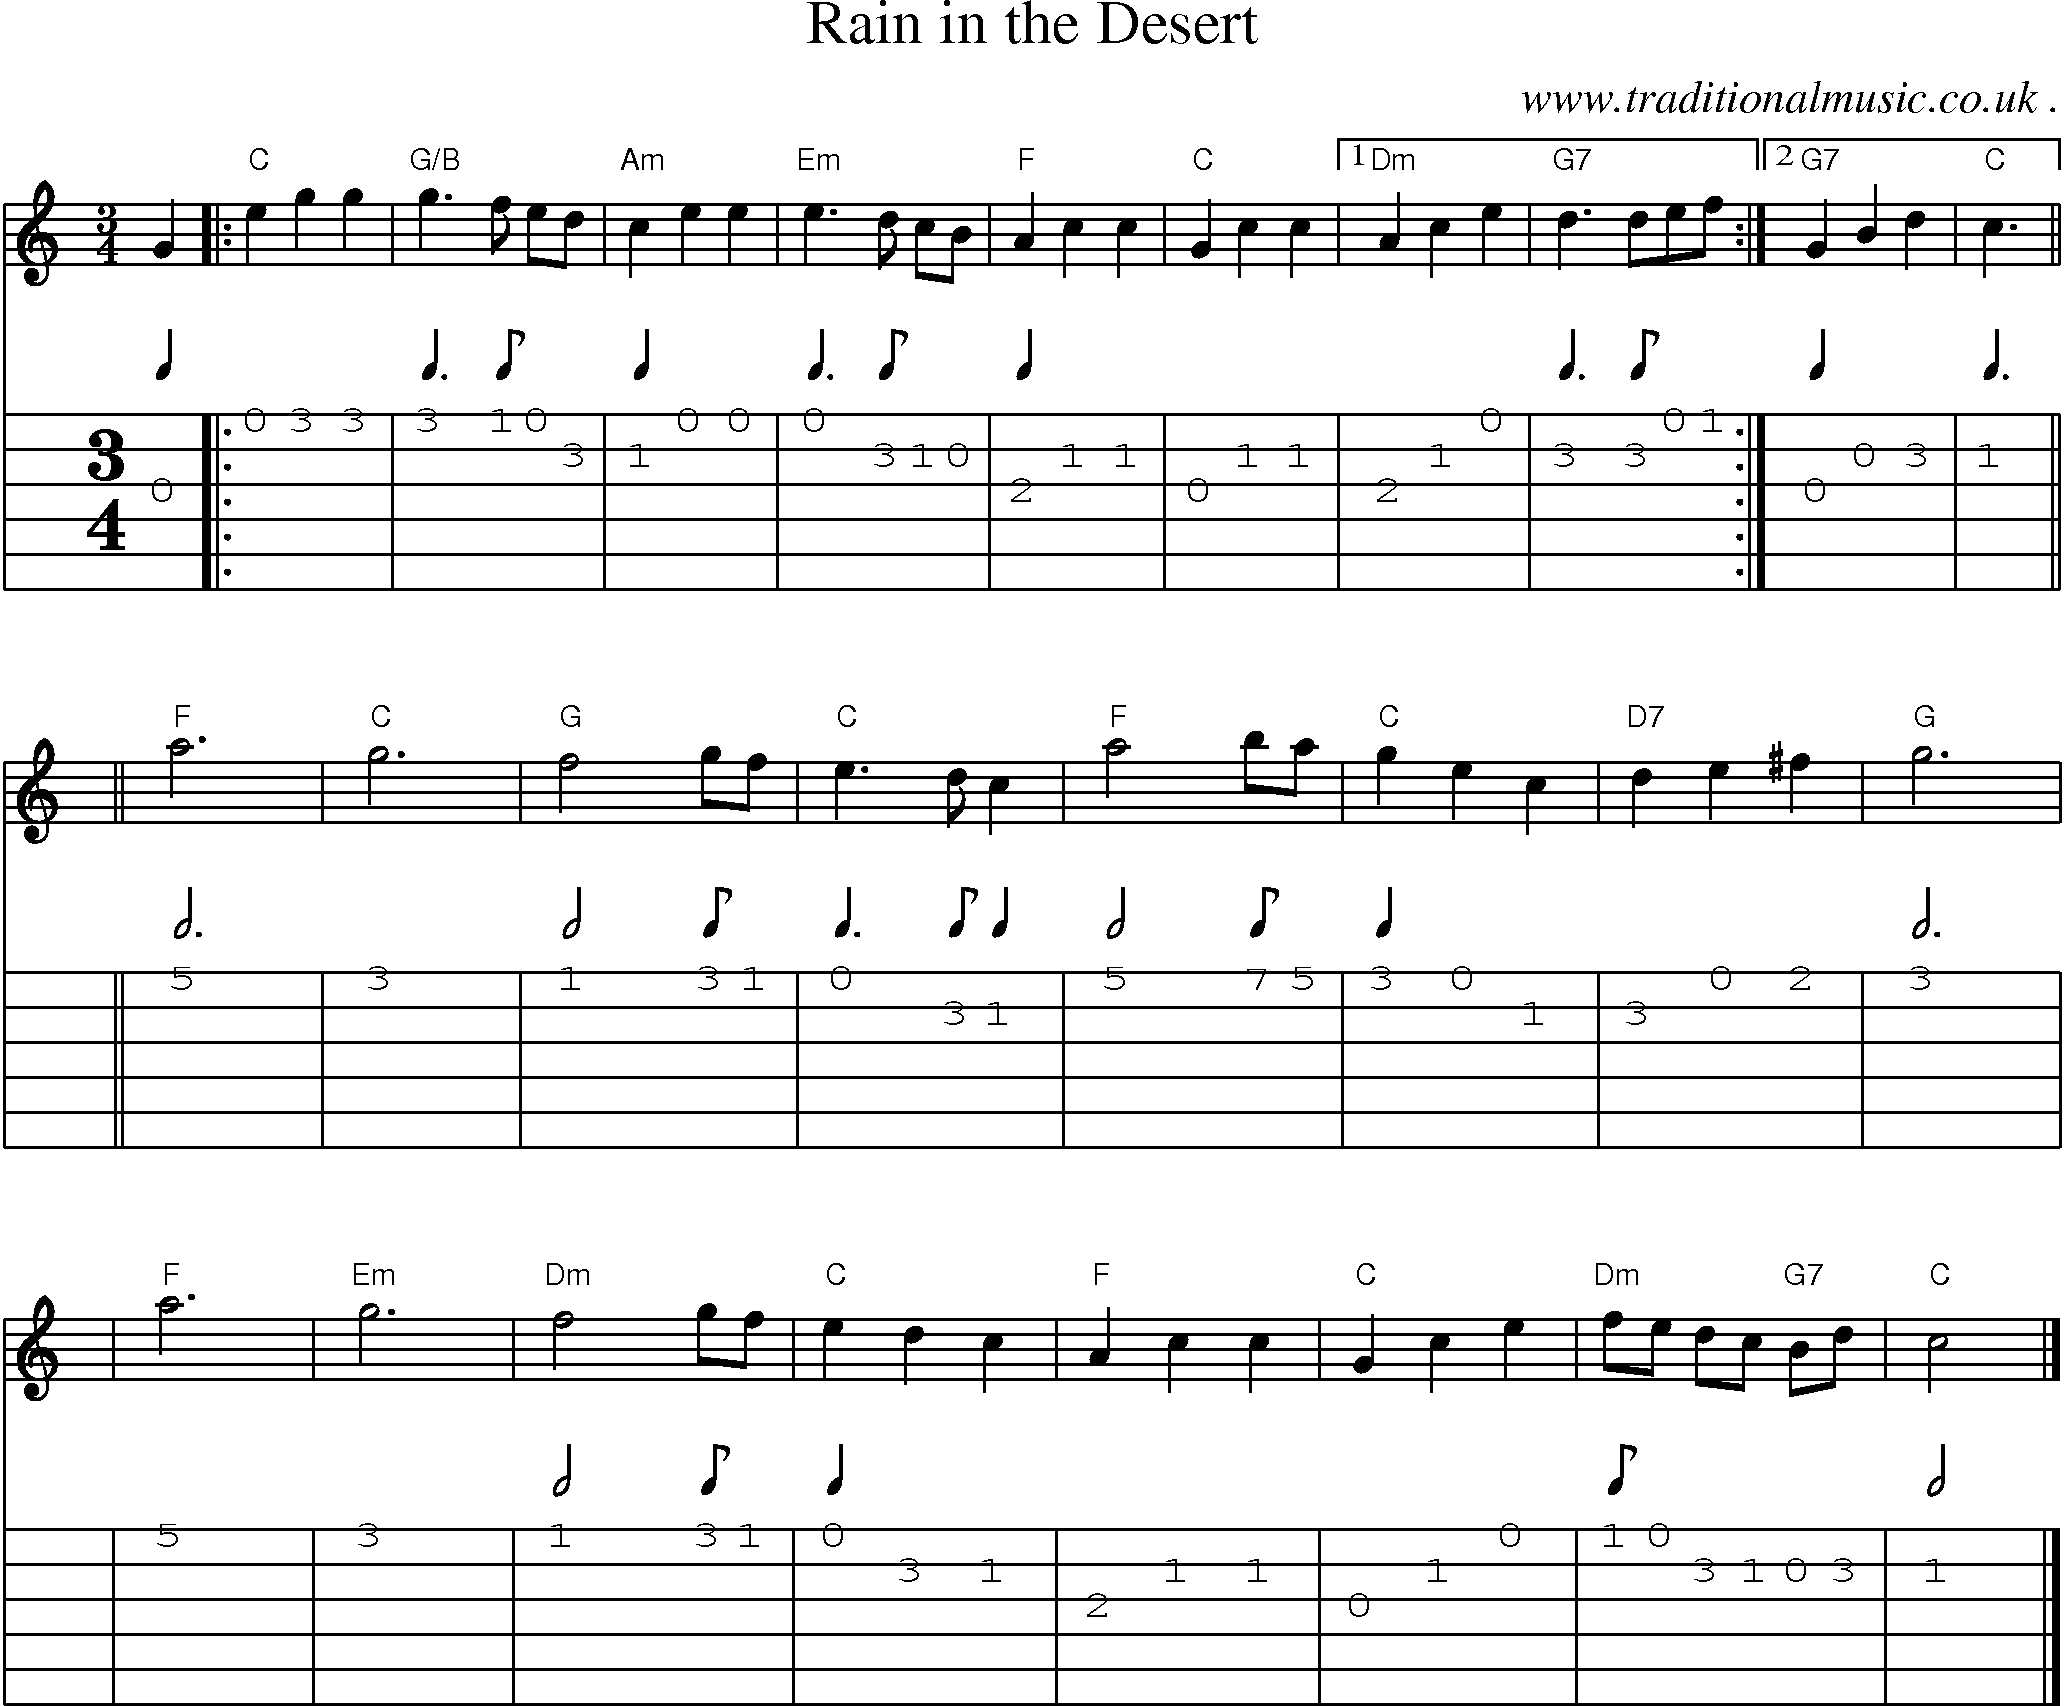 Sheet-music  score, Chords and Guitar Tabs for Rain In The Desert